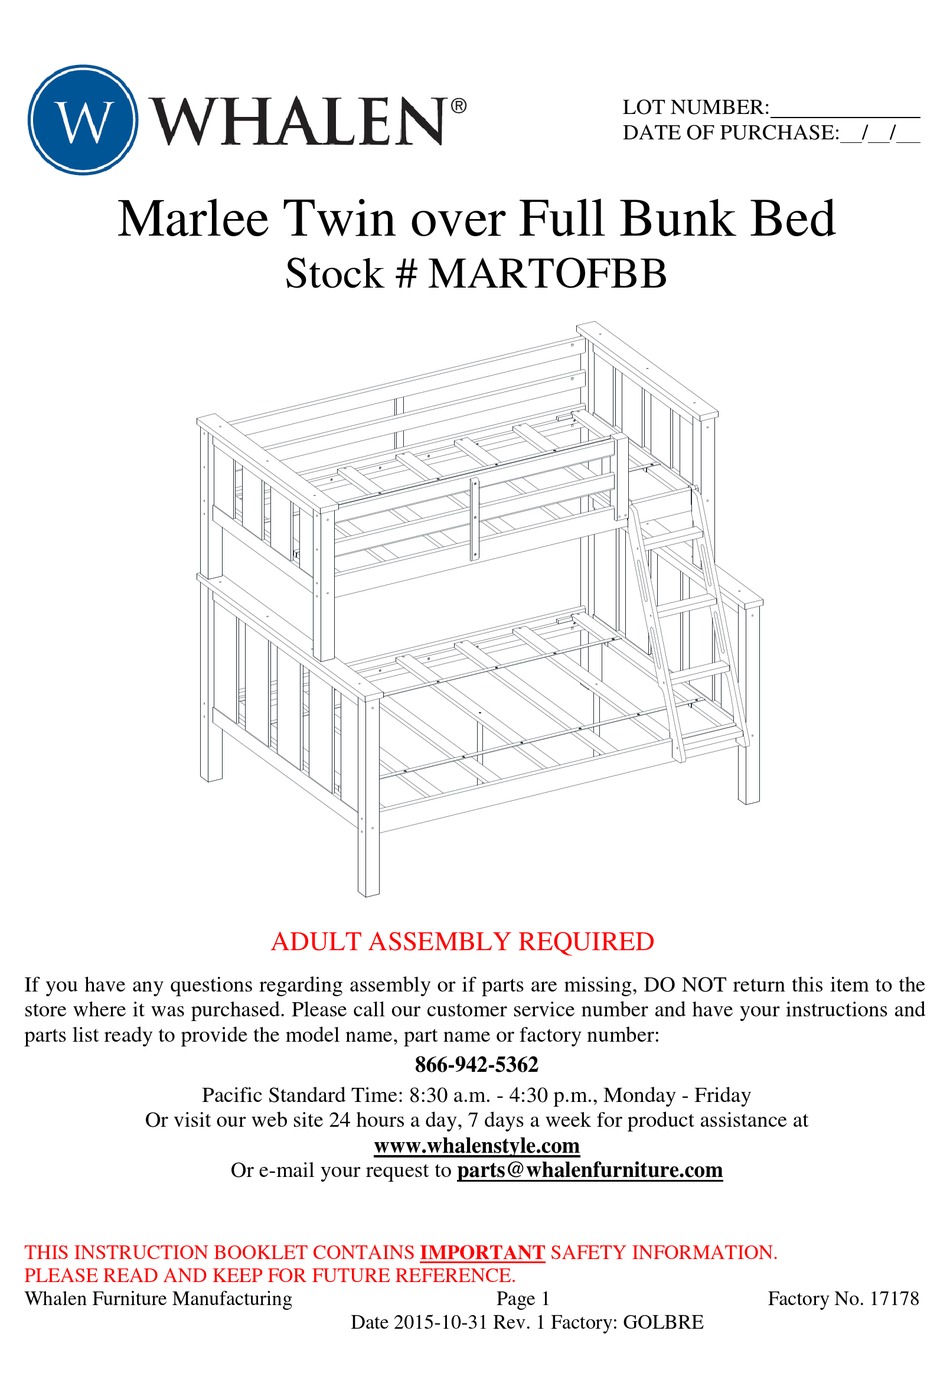 Whalen Marlee Twin Over Full Bunk Bed, Canyon Furniture Bunk Bed Instructions